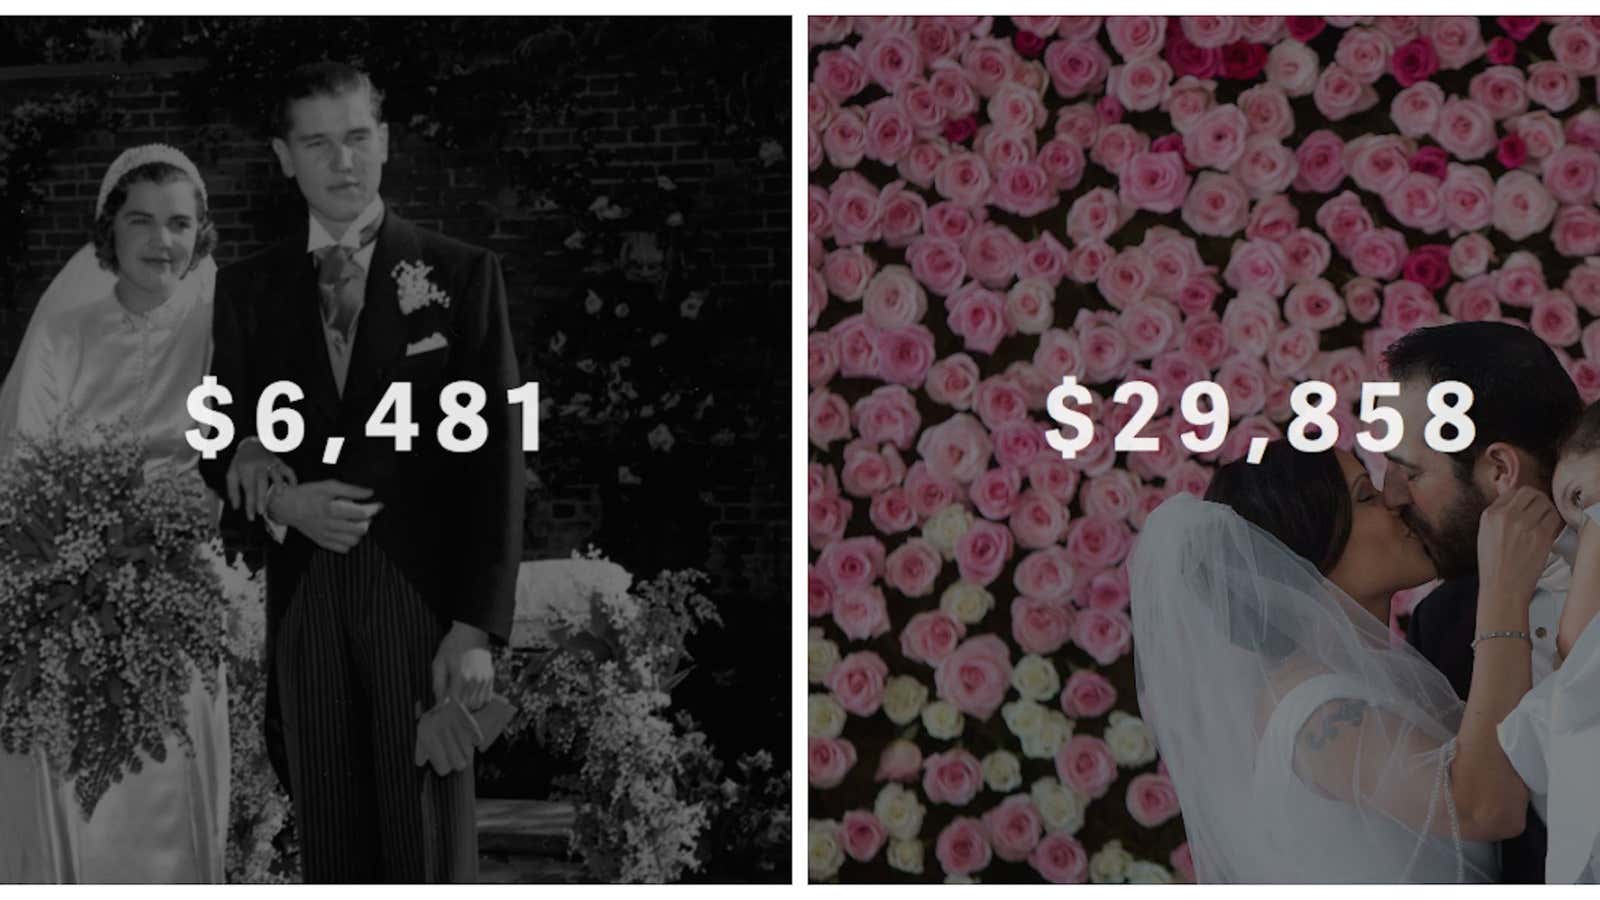 Even adjusted for inflation, Americans spend a lot more on weddings today than they did 80 years ago.